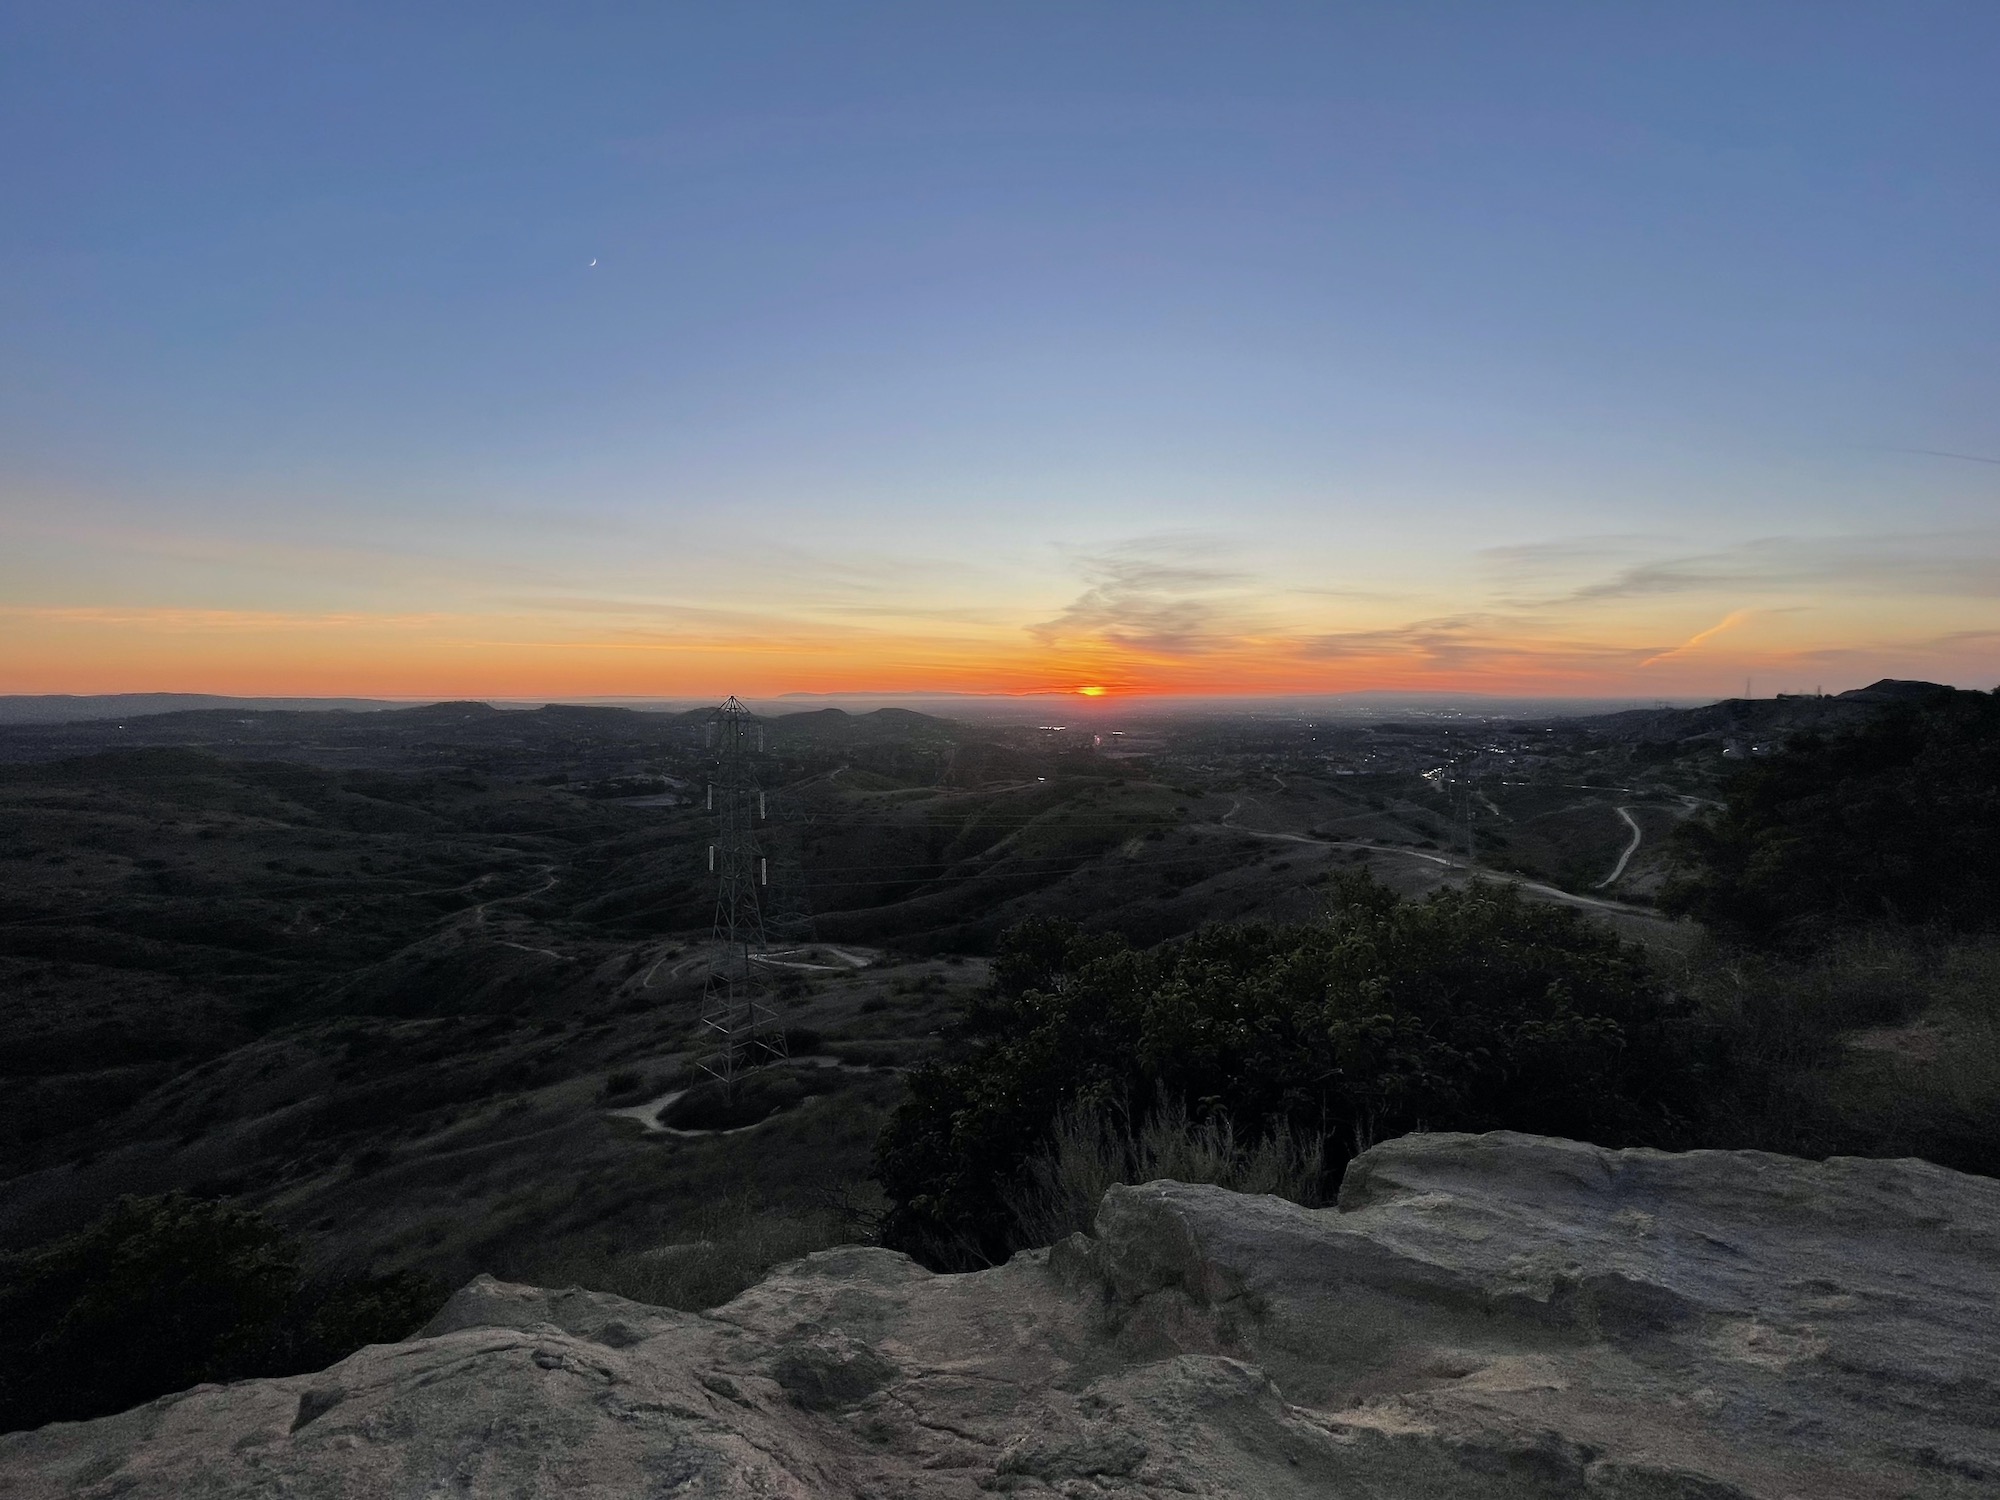 Sunset over pacific ocean - robbers roost vantage point - anaheim hills -24